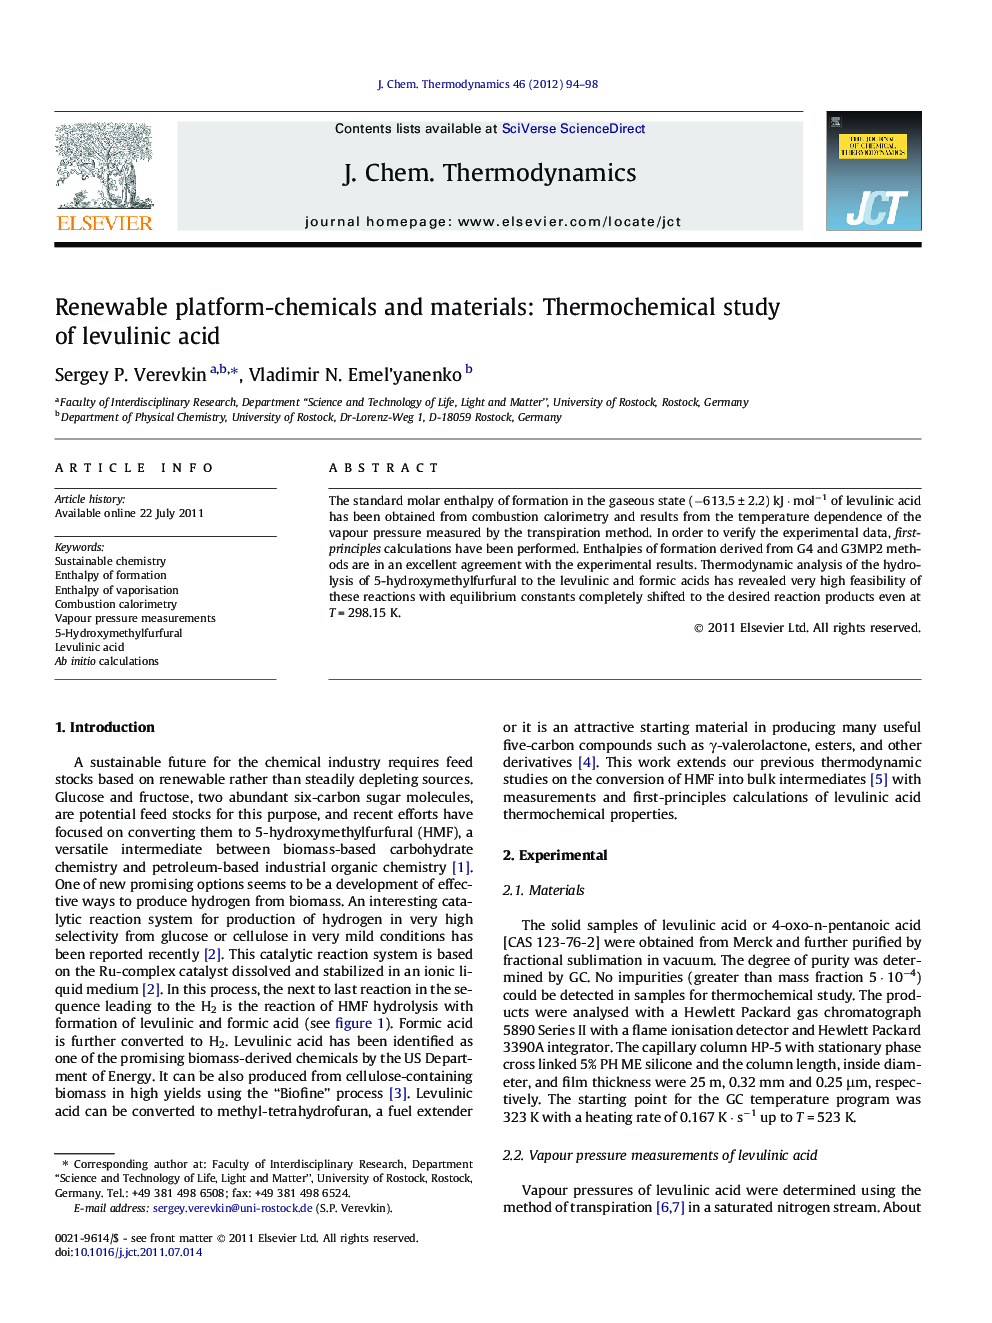 Renewable platform-chemicals and materials: Thermochemical study of levulinic acid